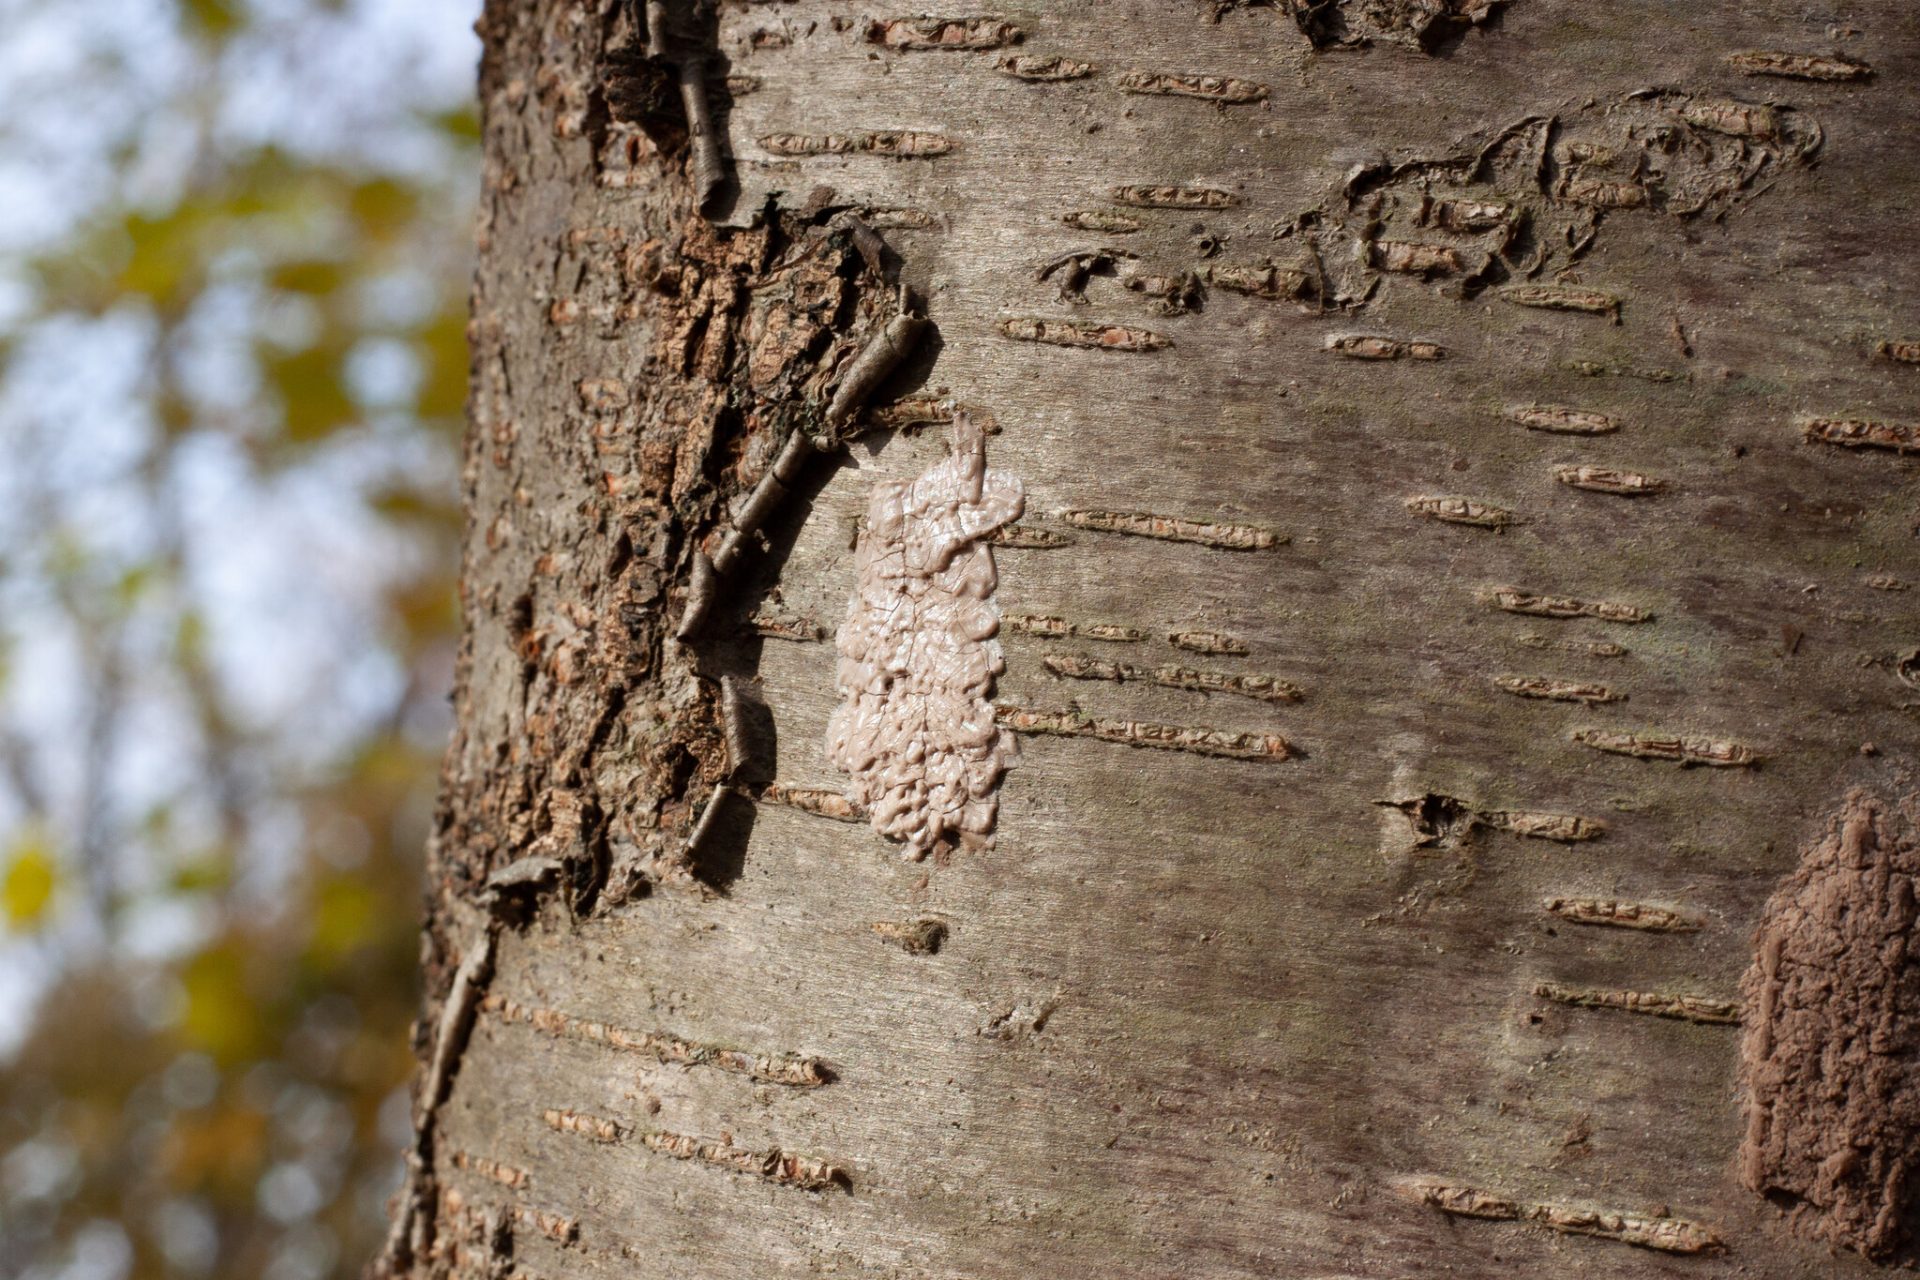 A muddy-looking spotted lanternfly egg mass is seen on a tree trunk.